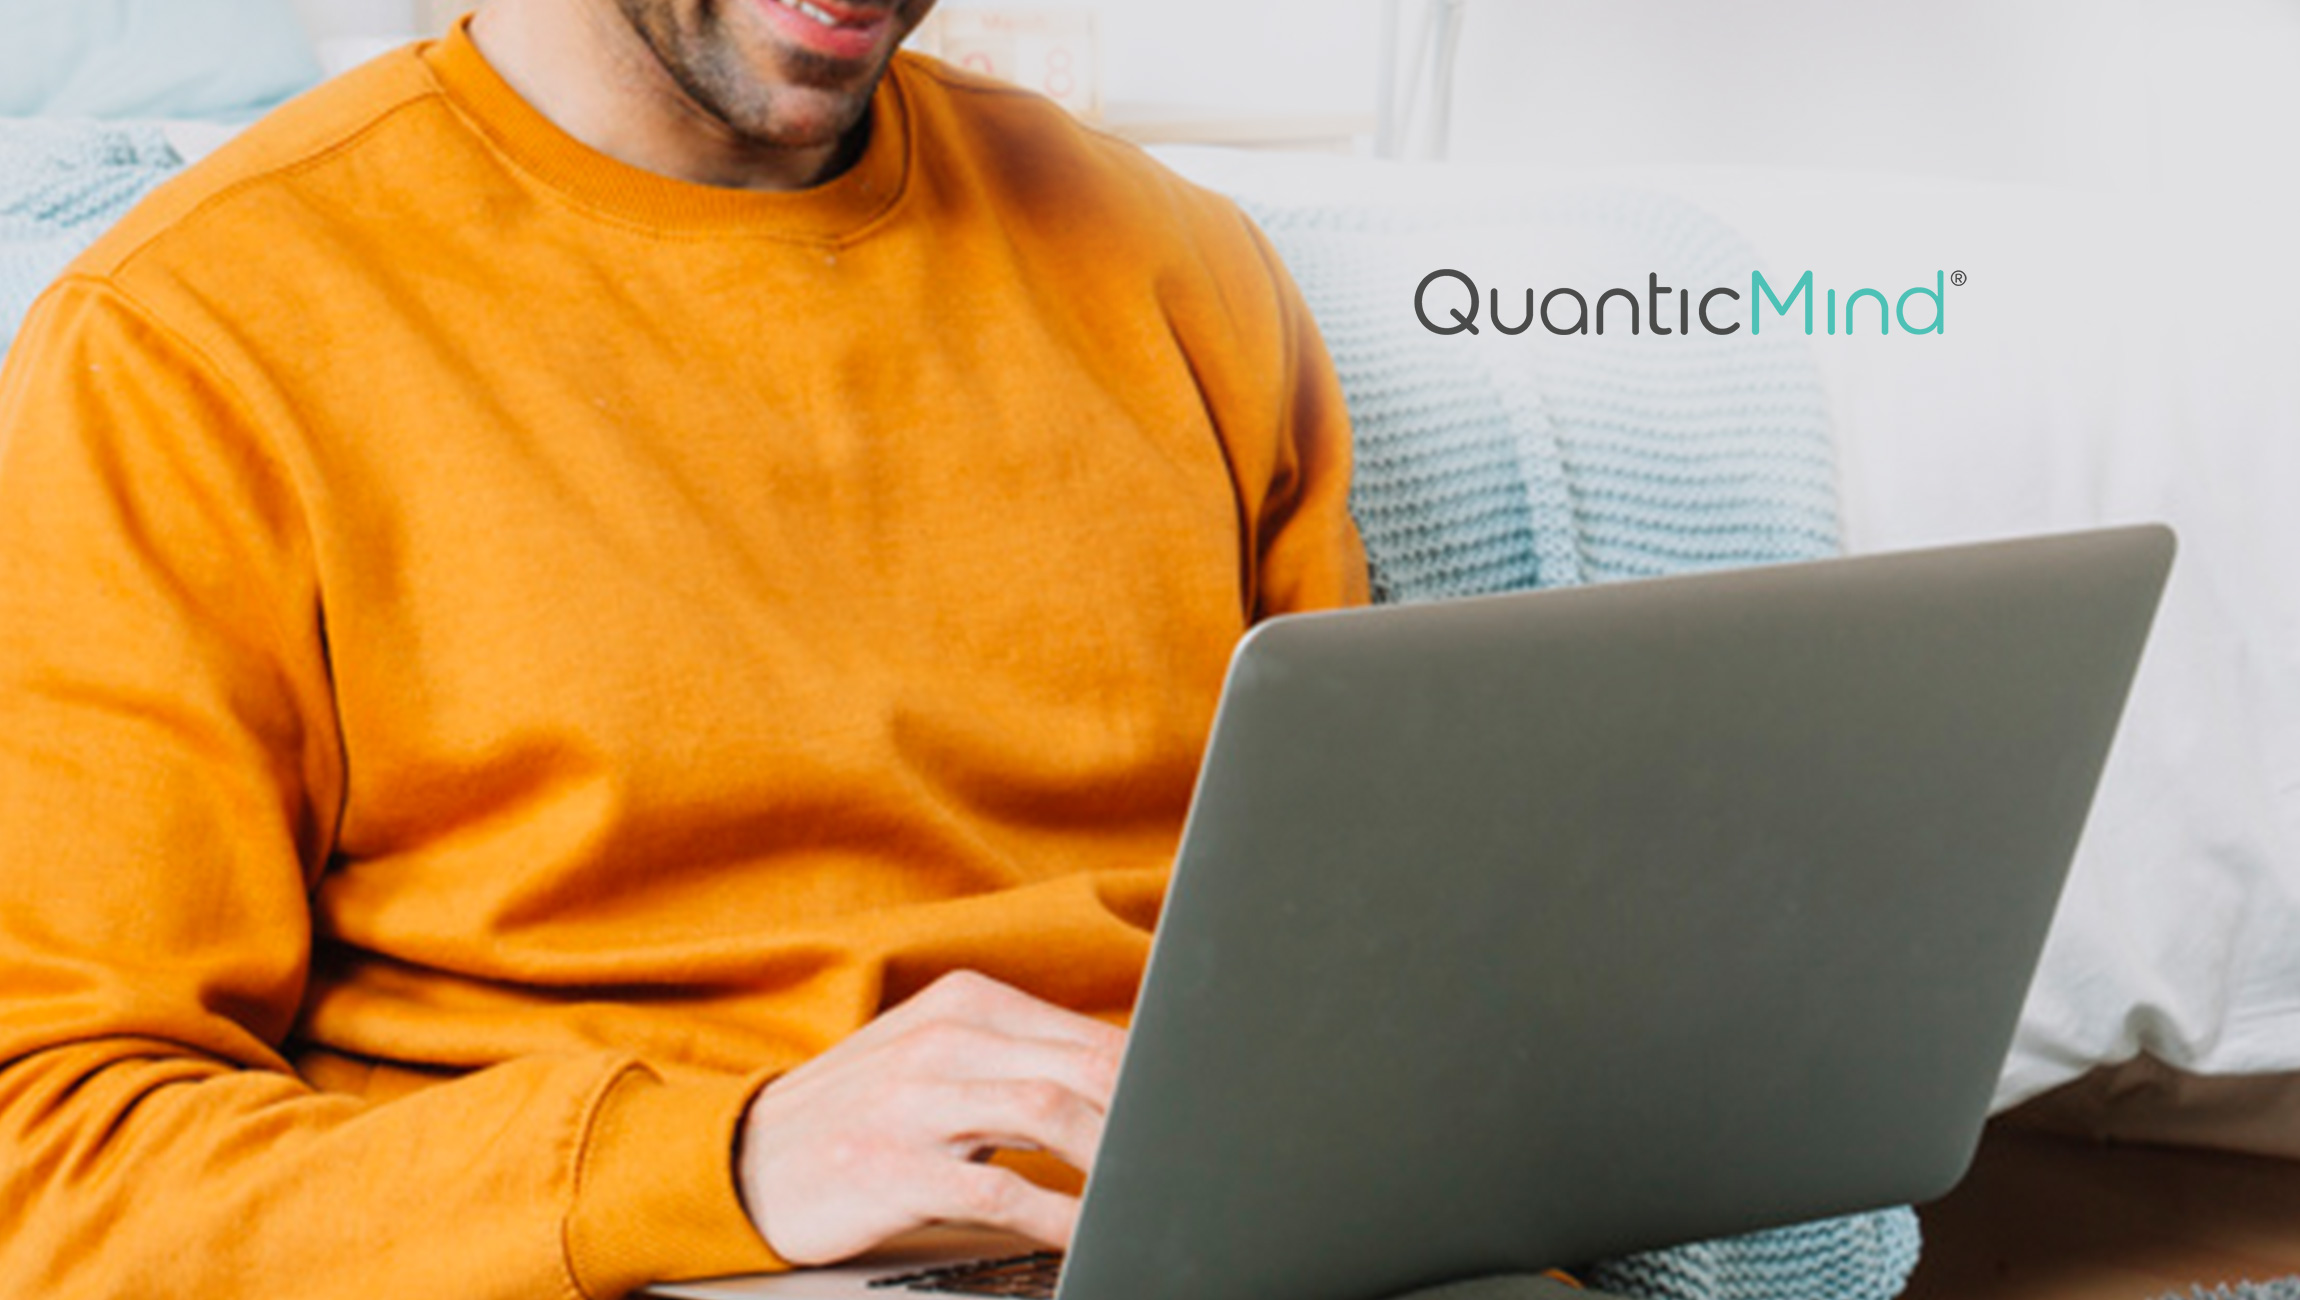 QuanticMind Offers SEM Marketers Powerful New Automated Bidding Capabilities